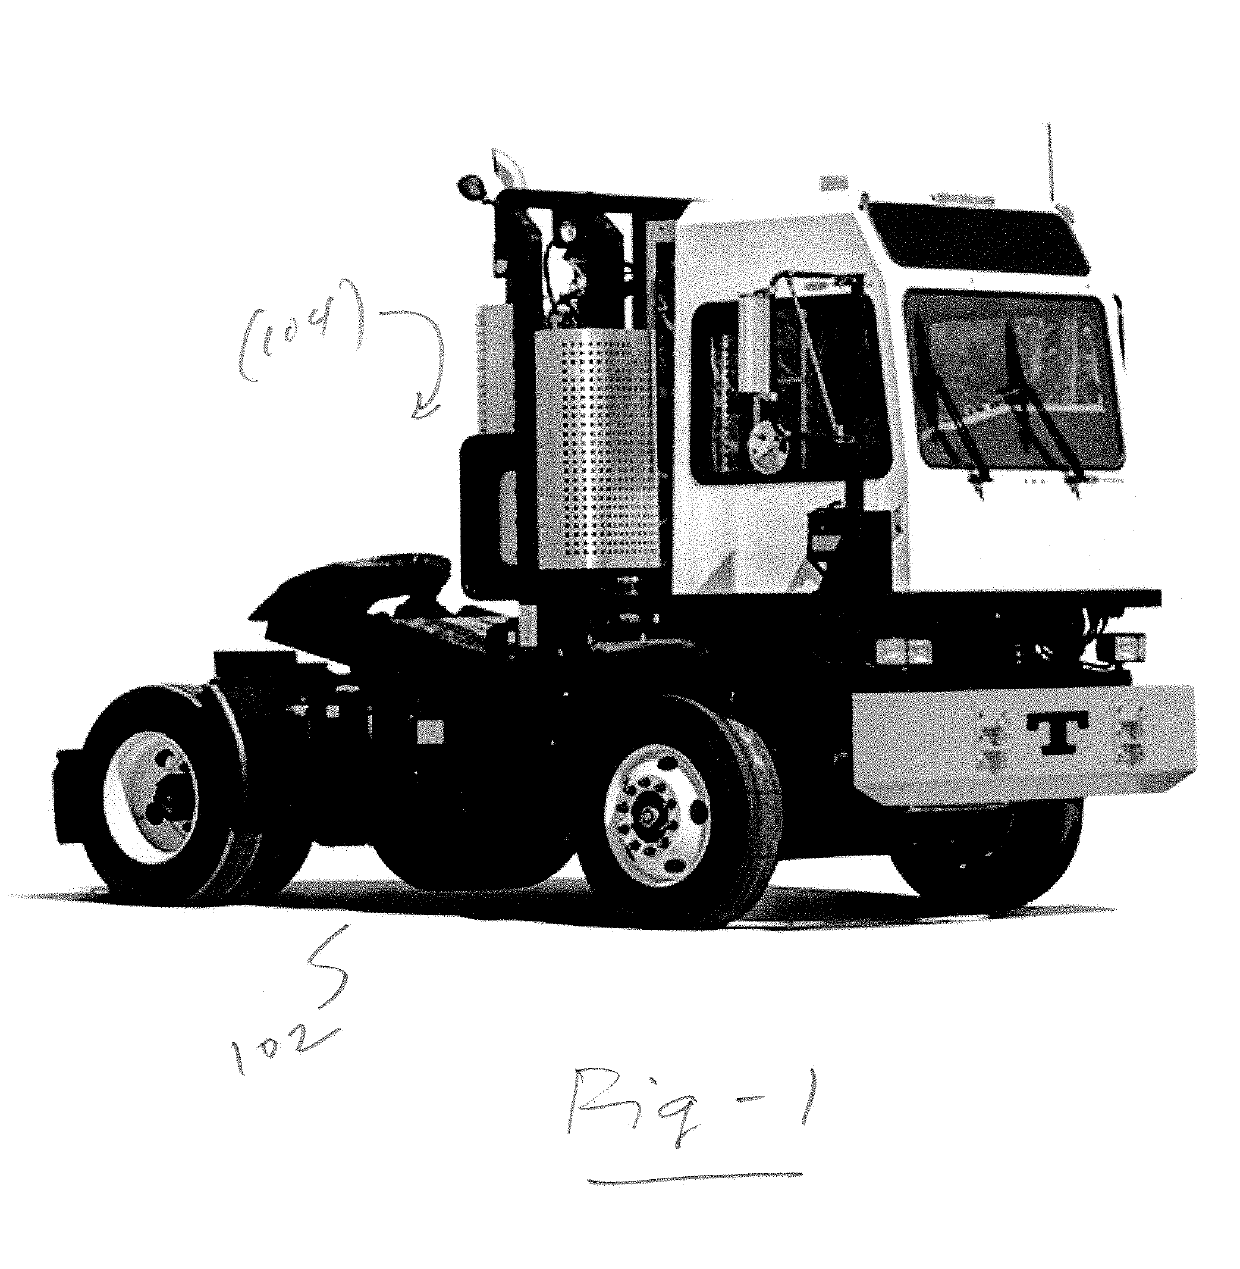 Terminal tractor with versatile fueling